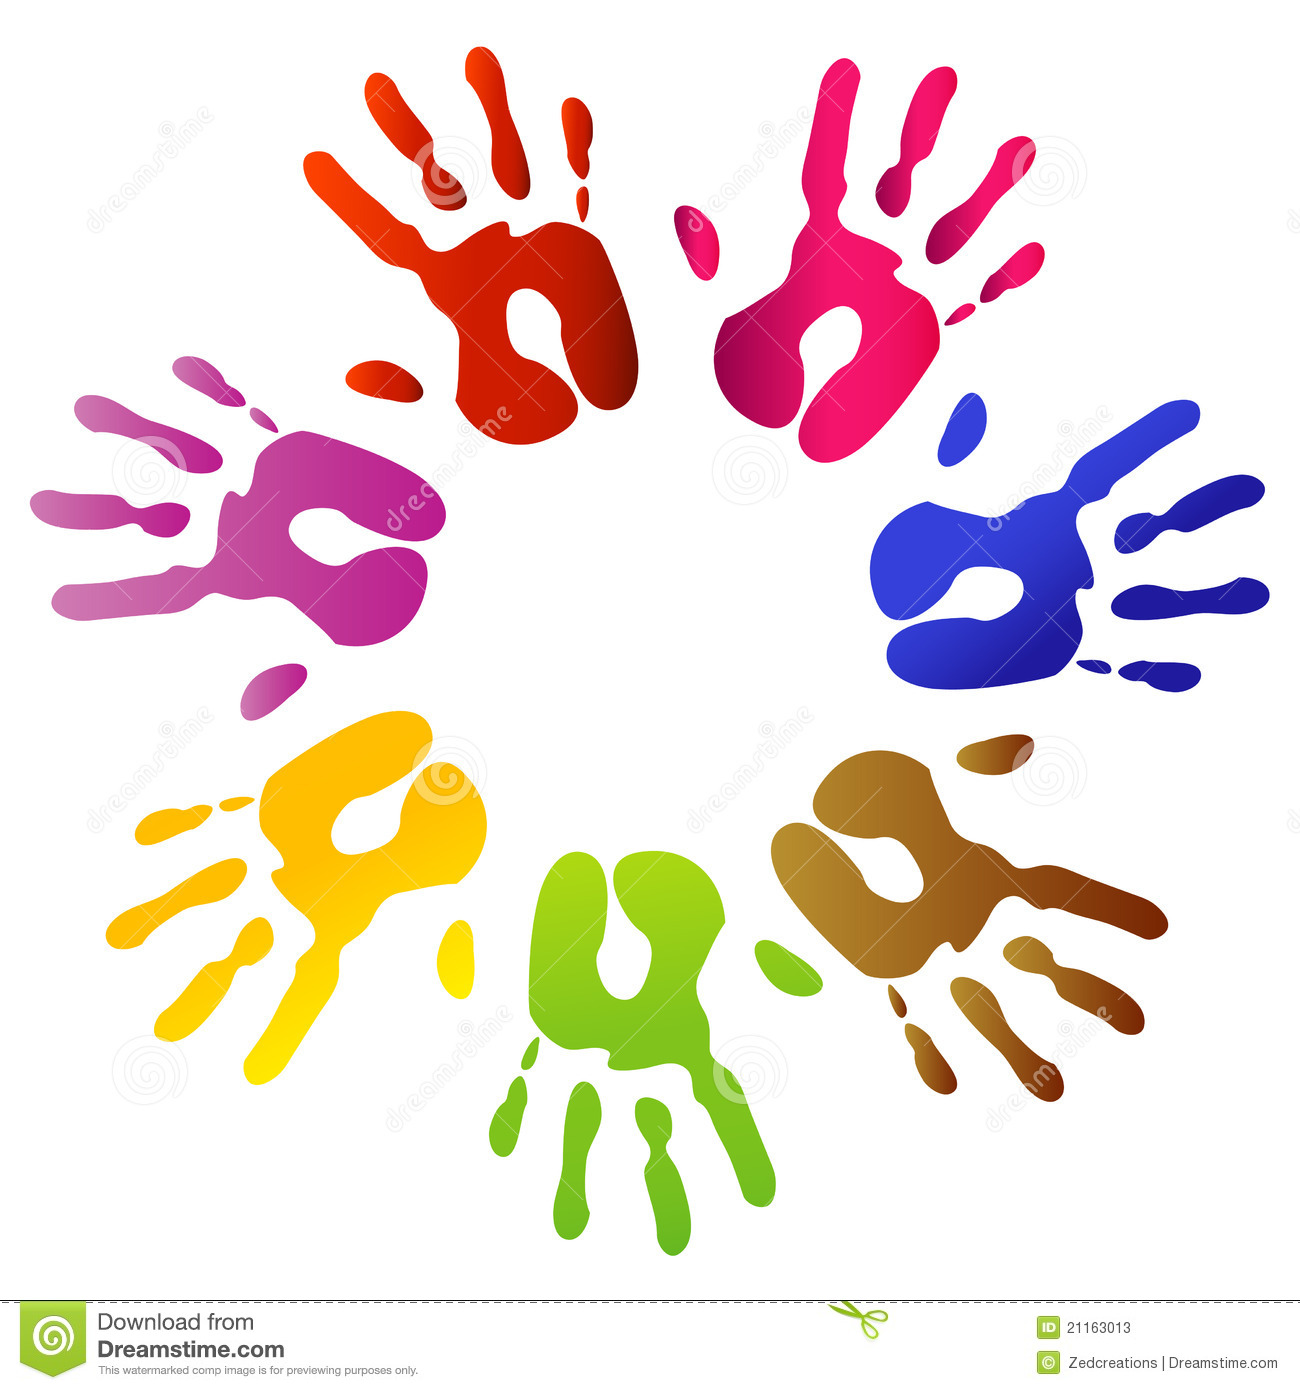 Hand Print Clip Art In A Circle   Clipart Panda   Free Clipart Images